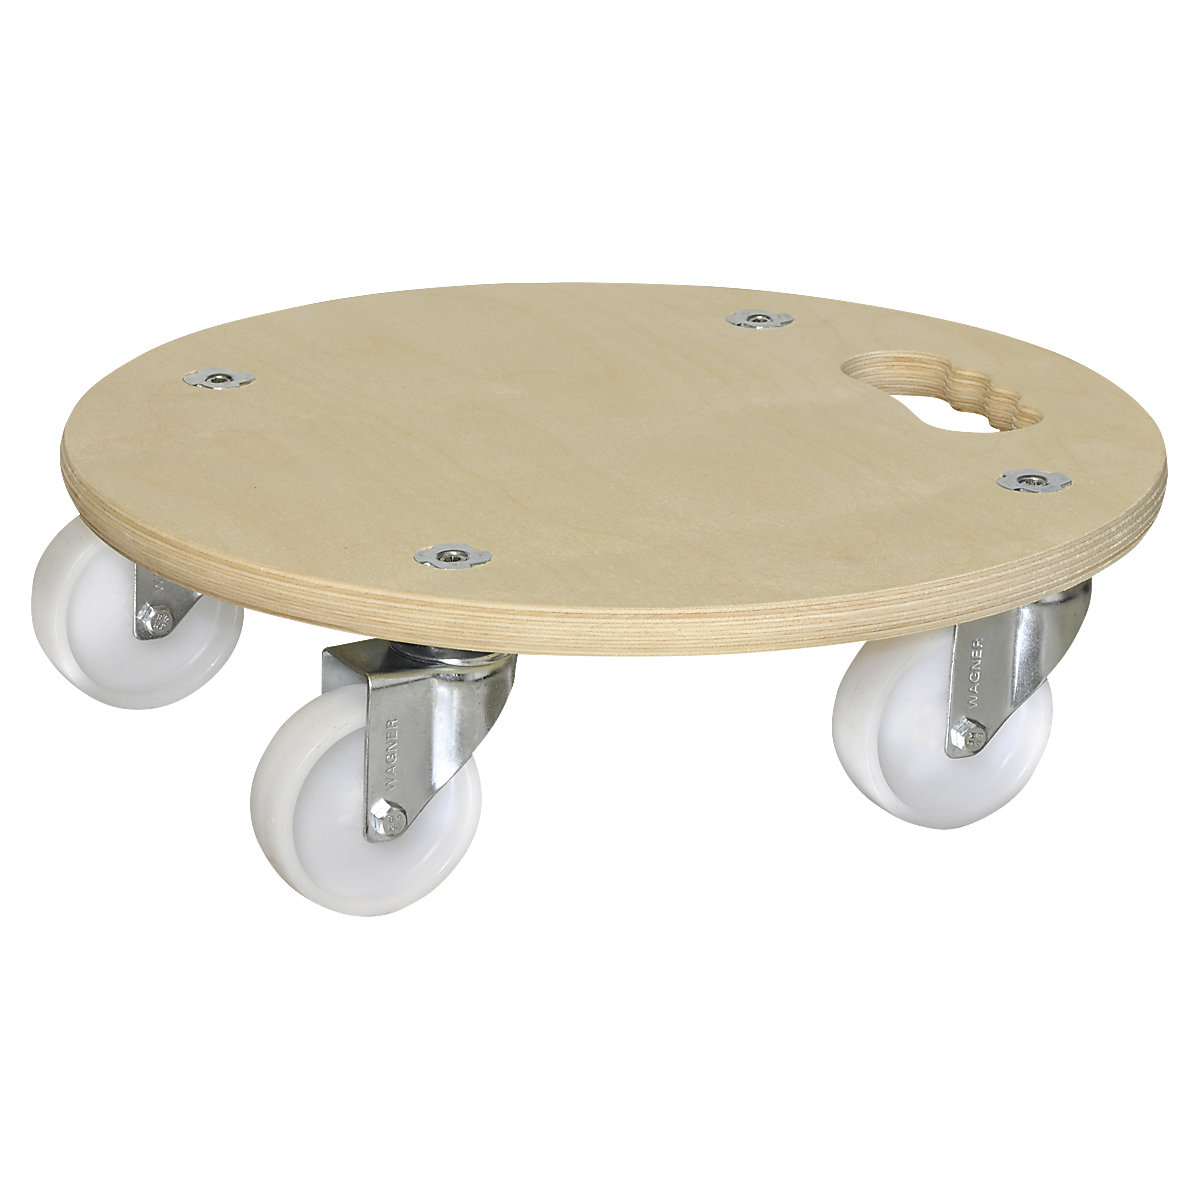 MM 1137 transport dolly, round – Wagner, Ø 380 mm, max. load 250 kg, 5+ items-3